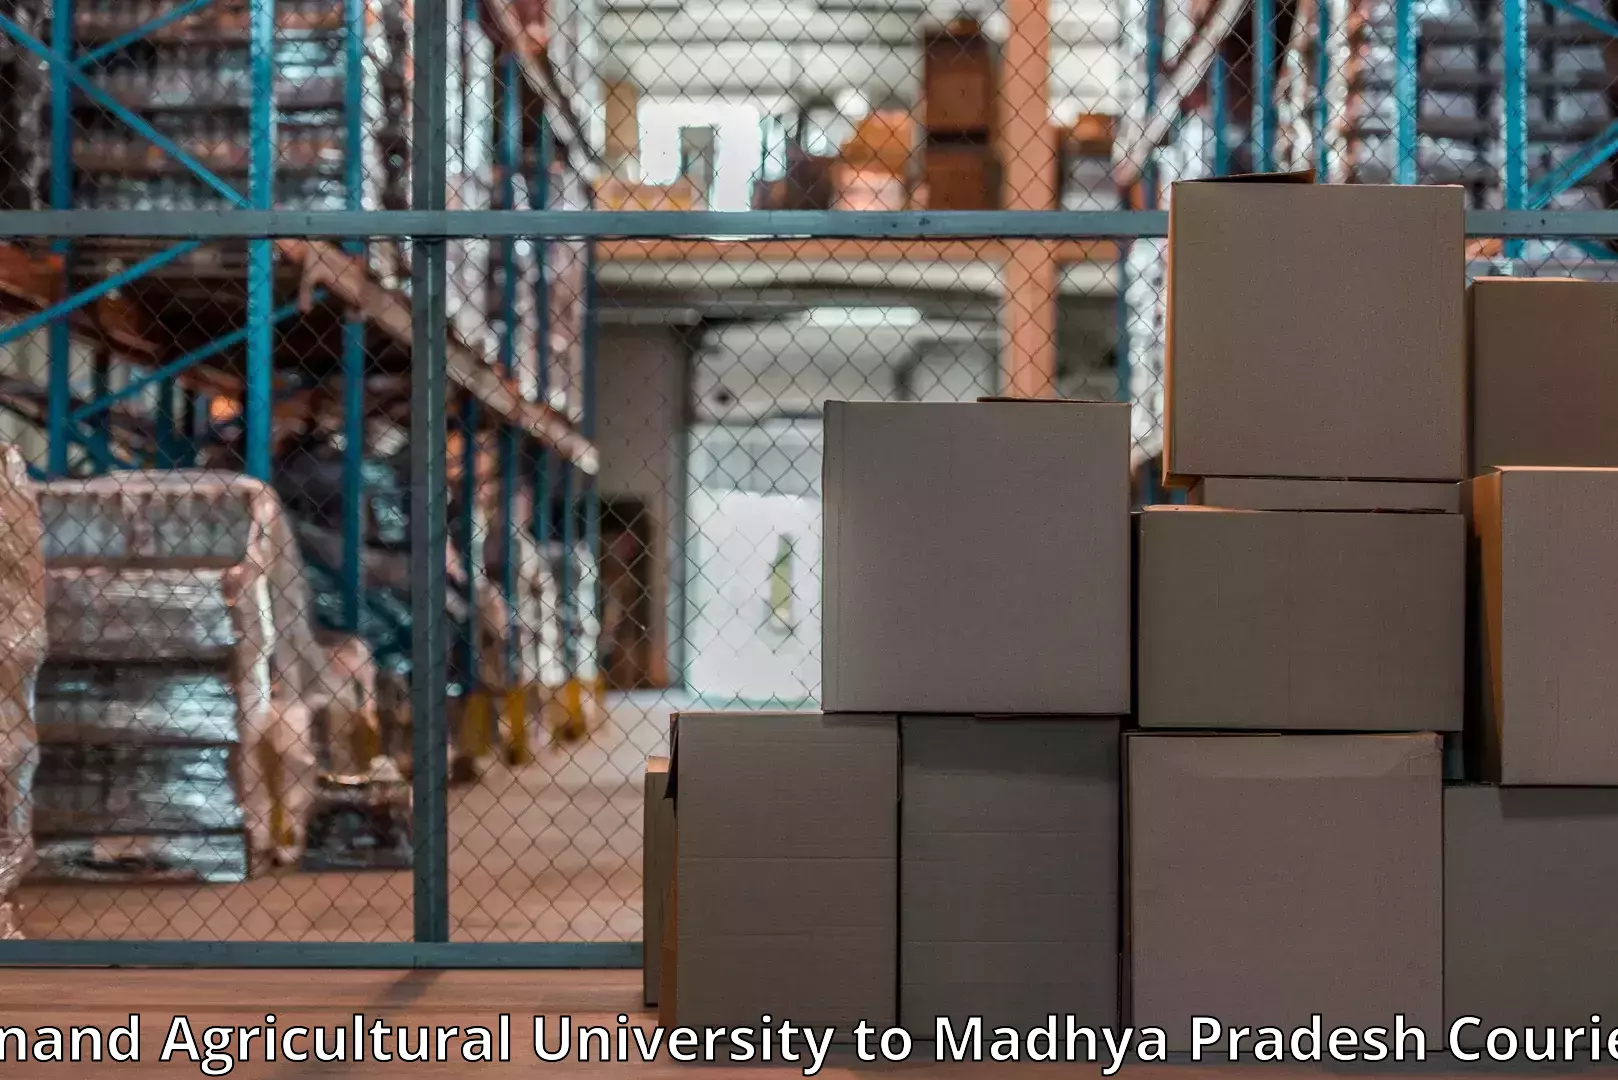 Professional home movers Anand Agricultural University to Dola